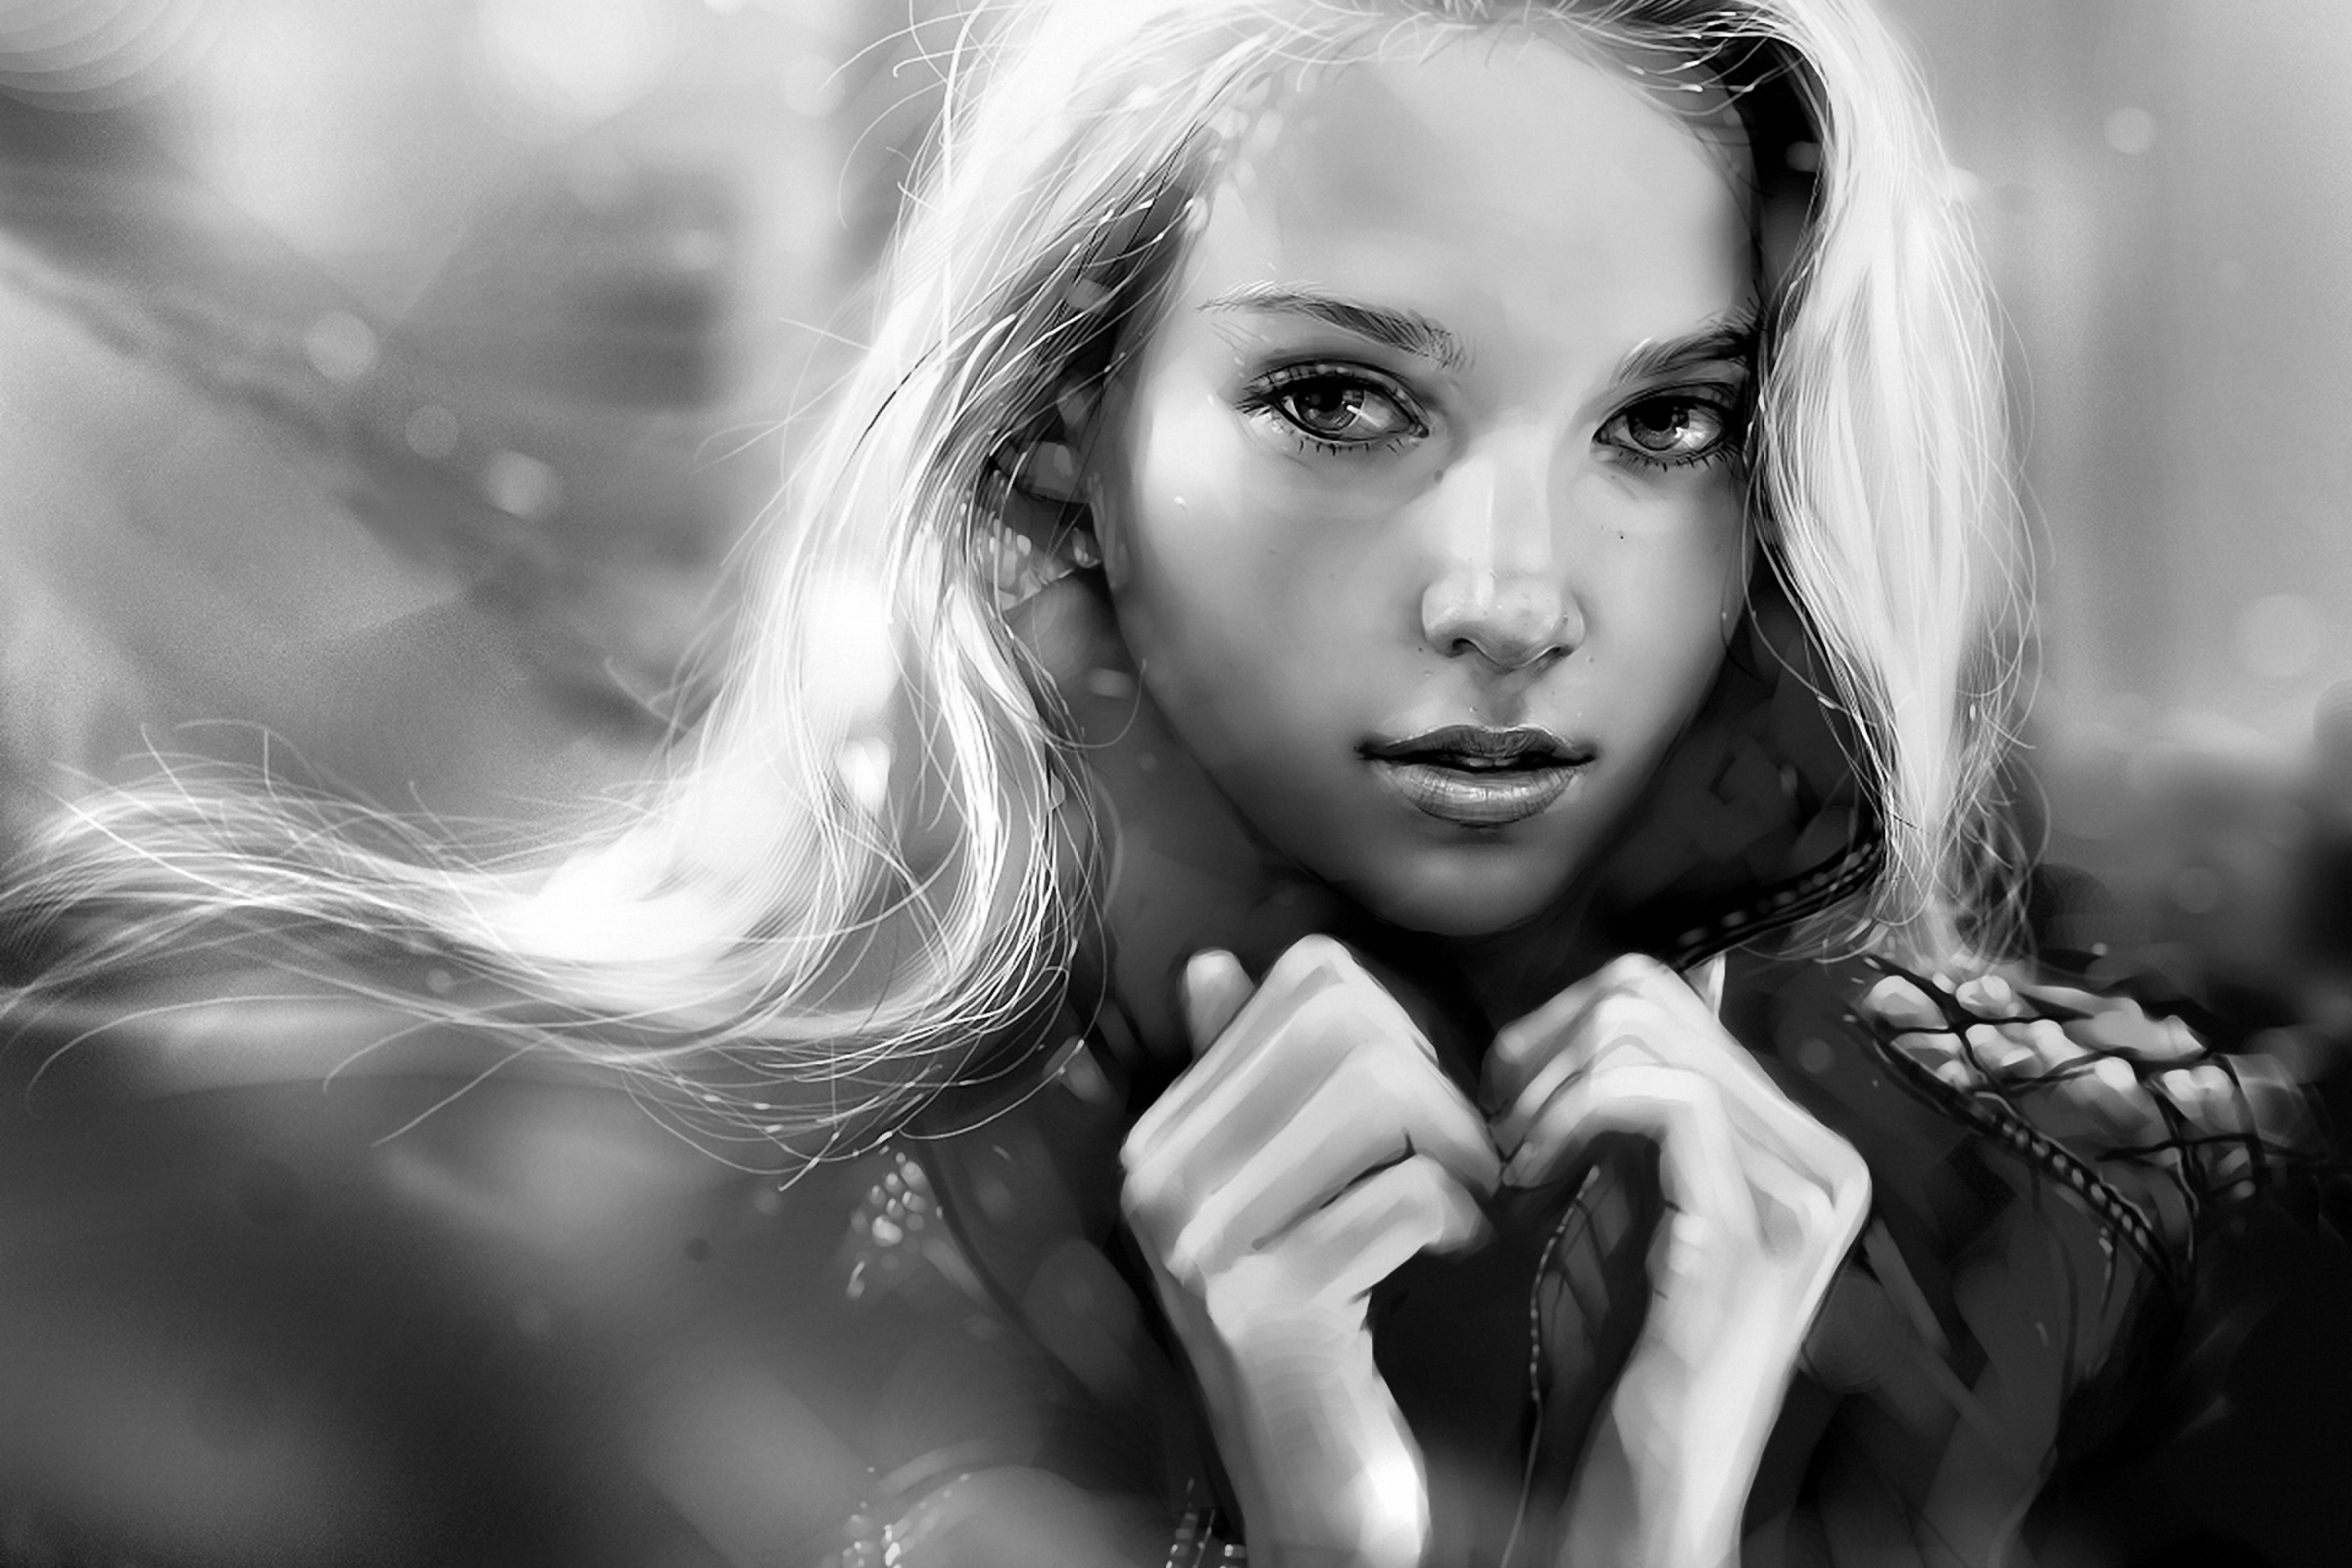 Black And White Blonde Painting wallpaper 2880x1920